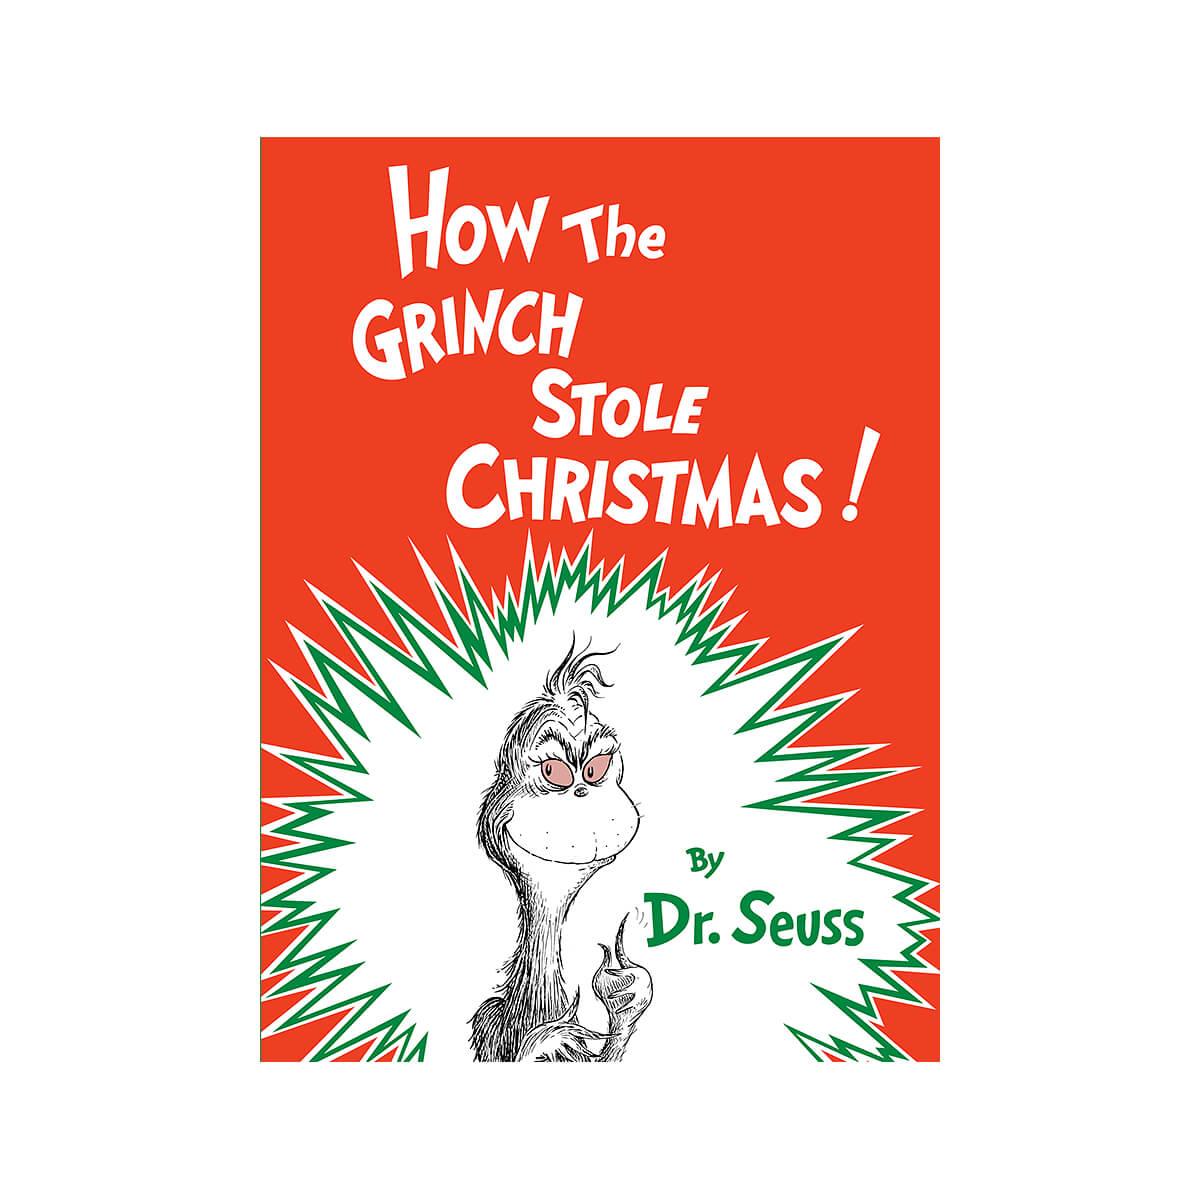  How The Grinch Stole Christmas Book